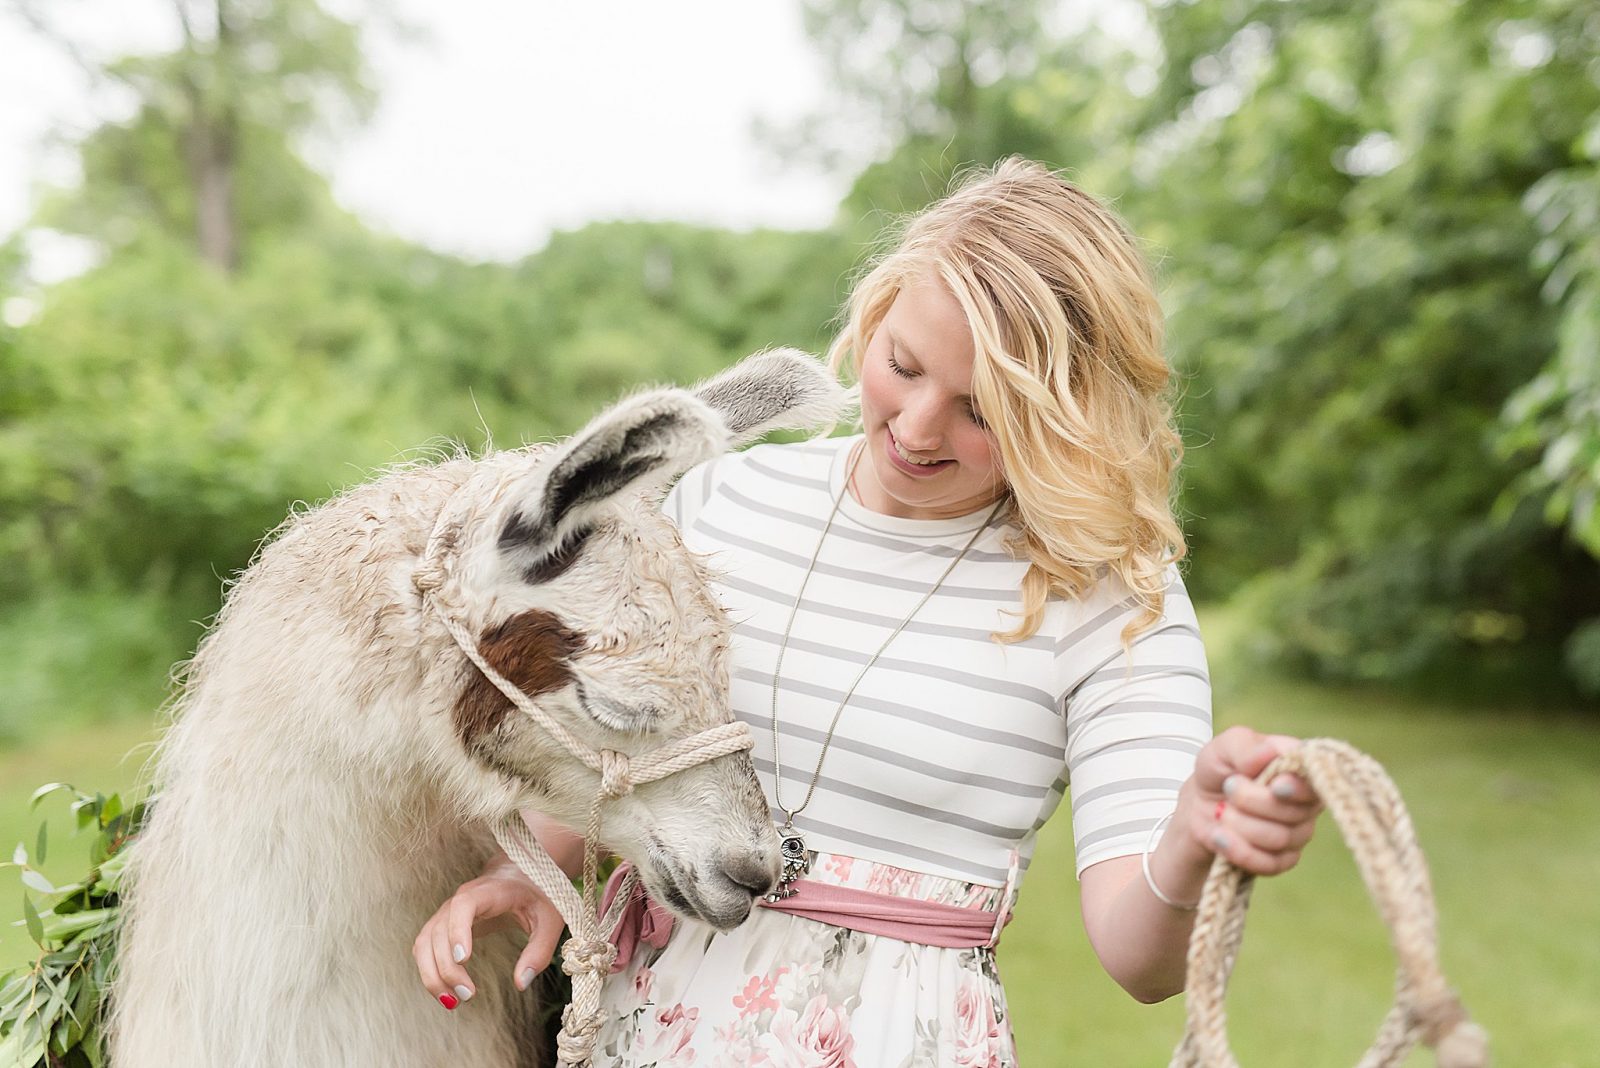 Senior Pictures with a Llama